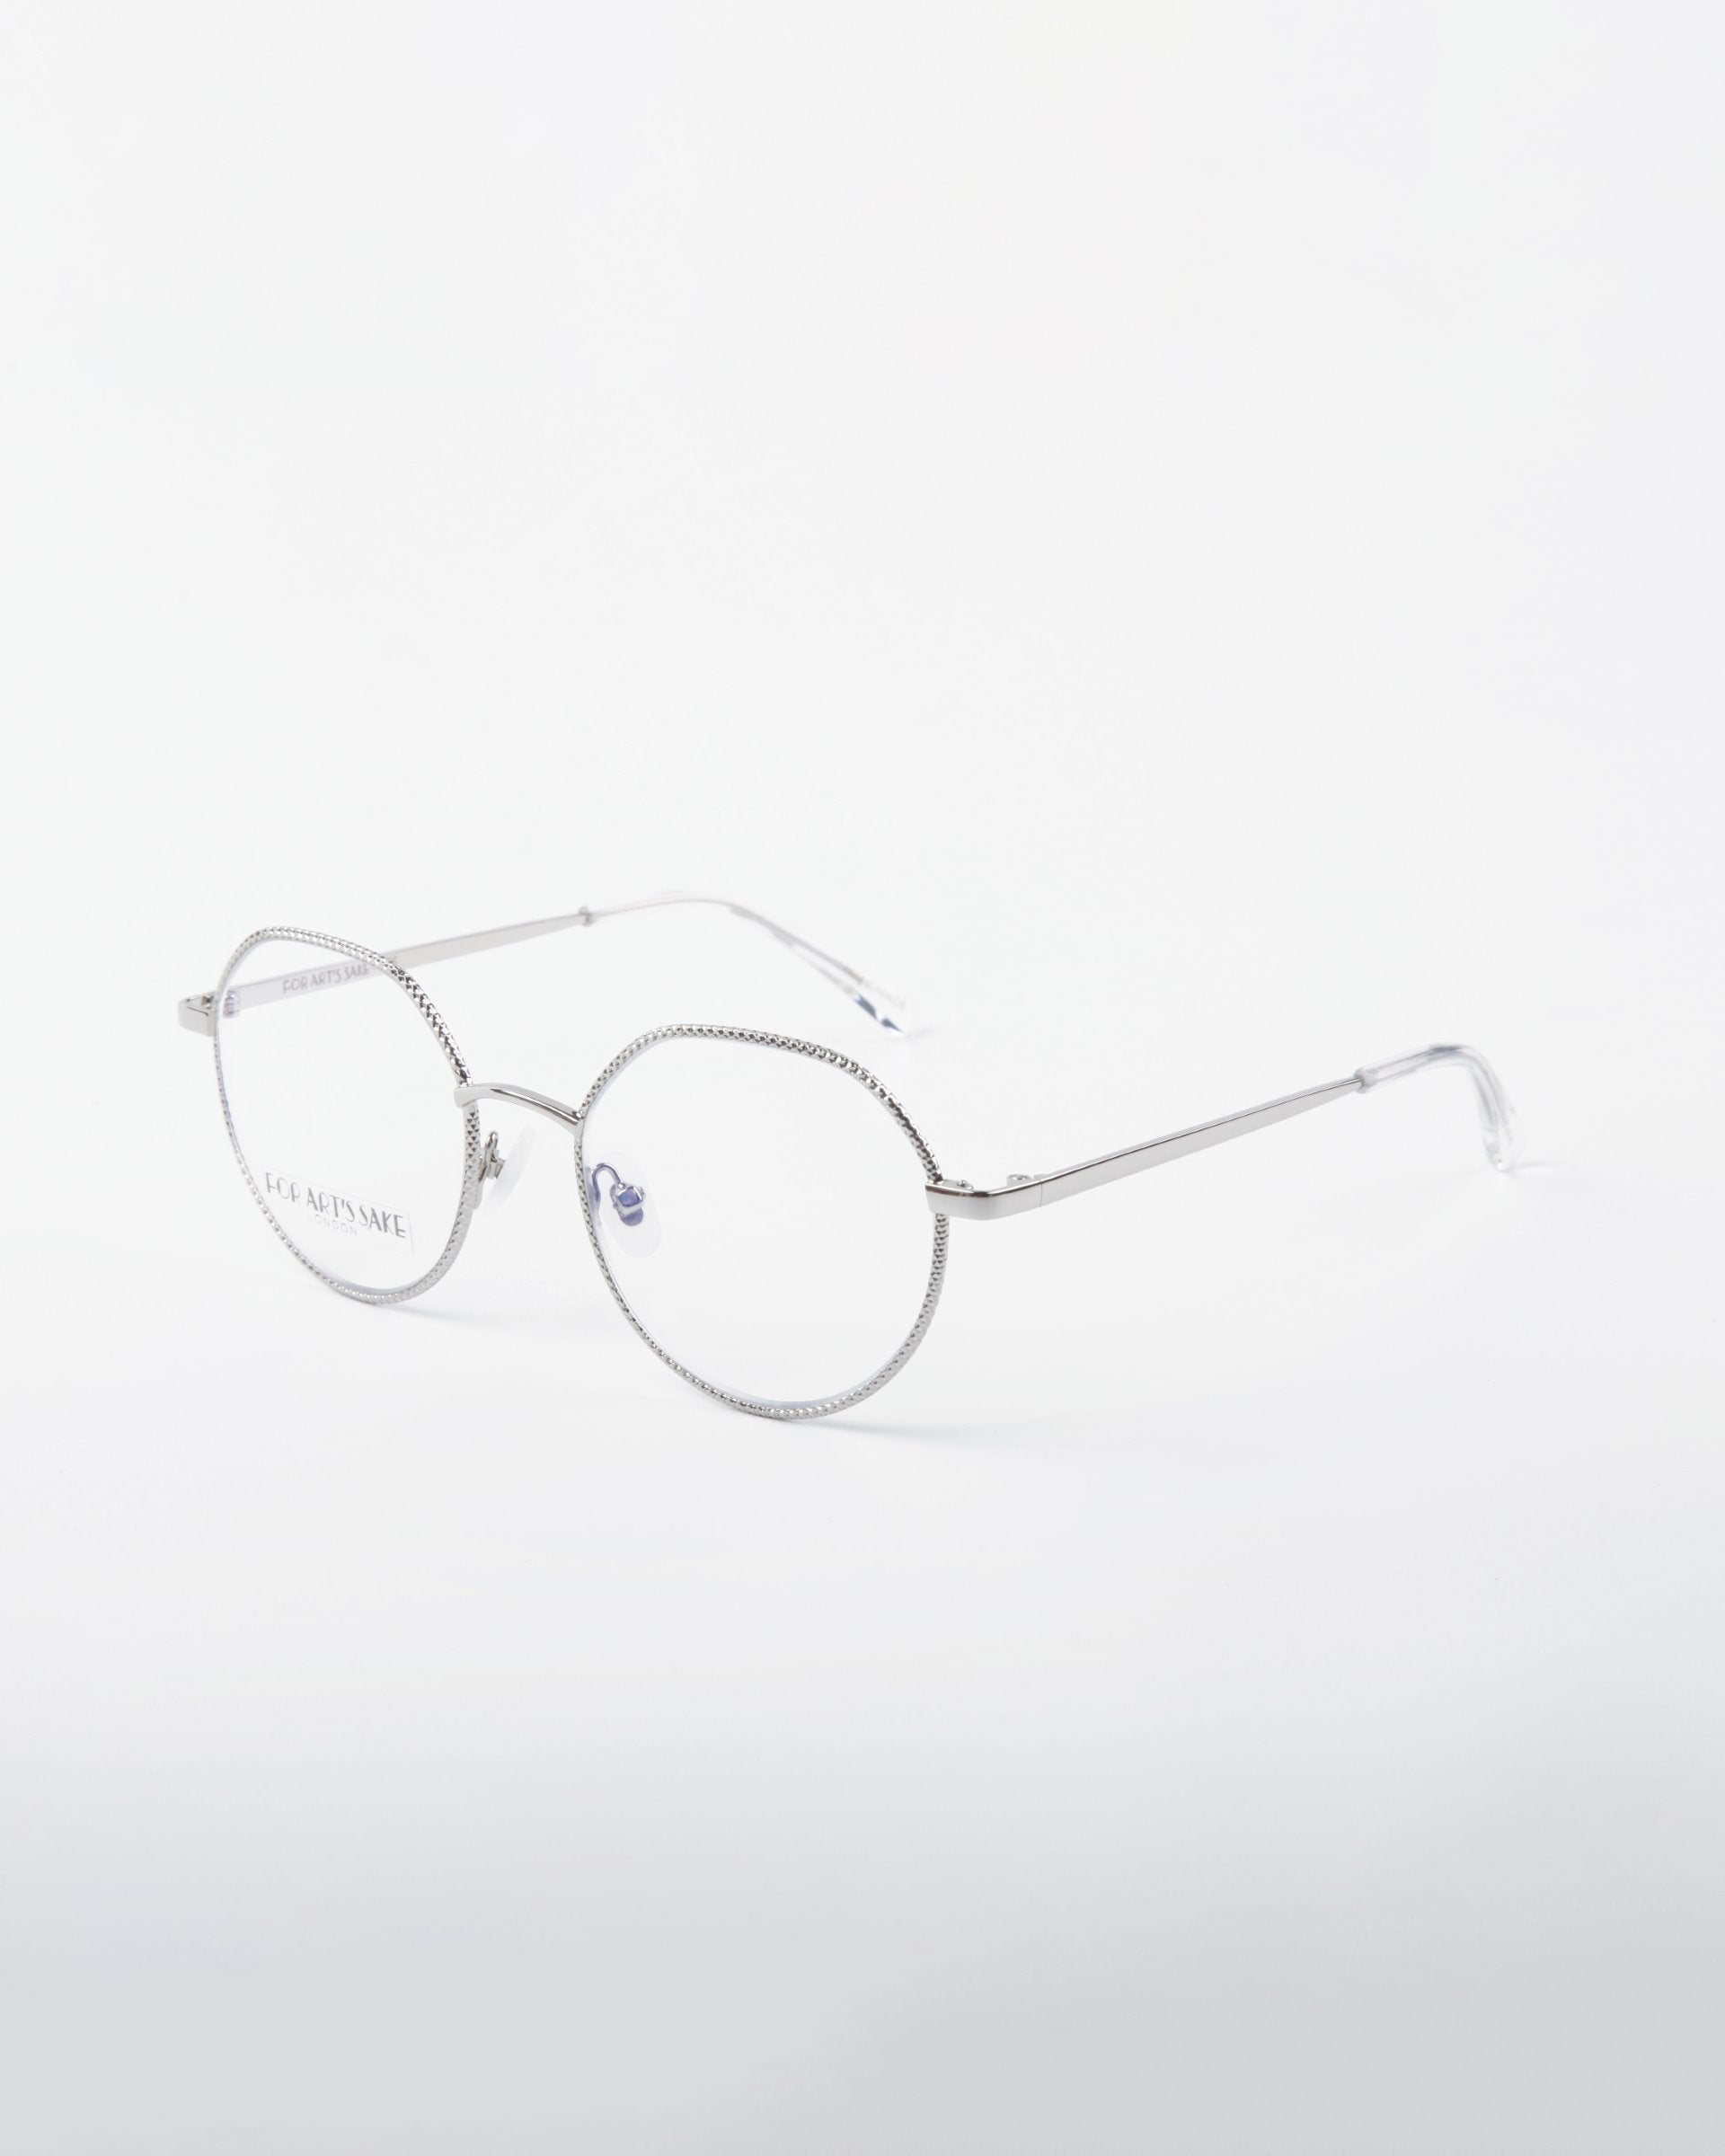 A pair of Hope eyeglasses by For Art&#39;s Sake® with round lenses and thin, 18-karat gold-plated arms. The frame features a subtle textured pattern around the lenses. The background is plain white, making the eyeglasses the focal point of the image.